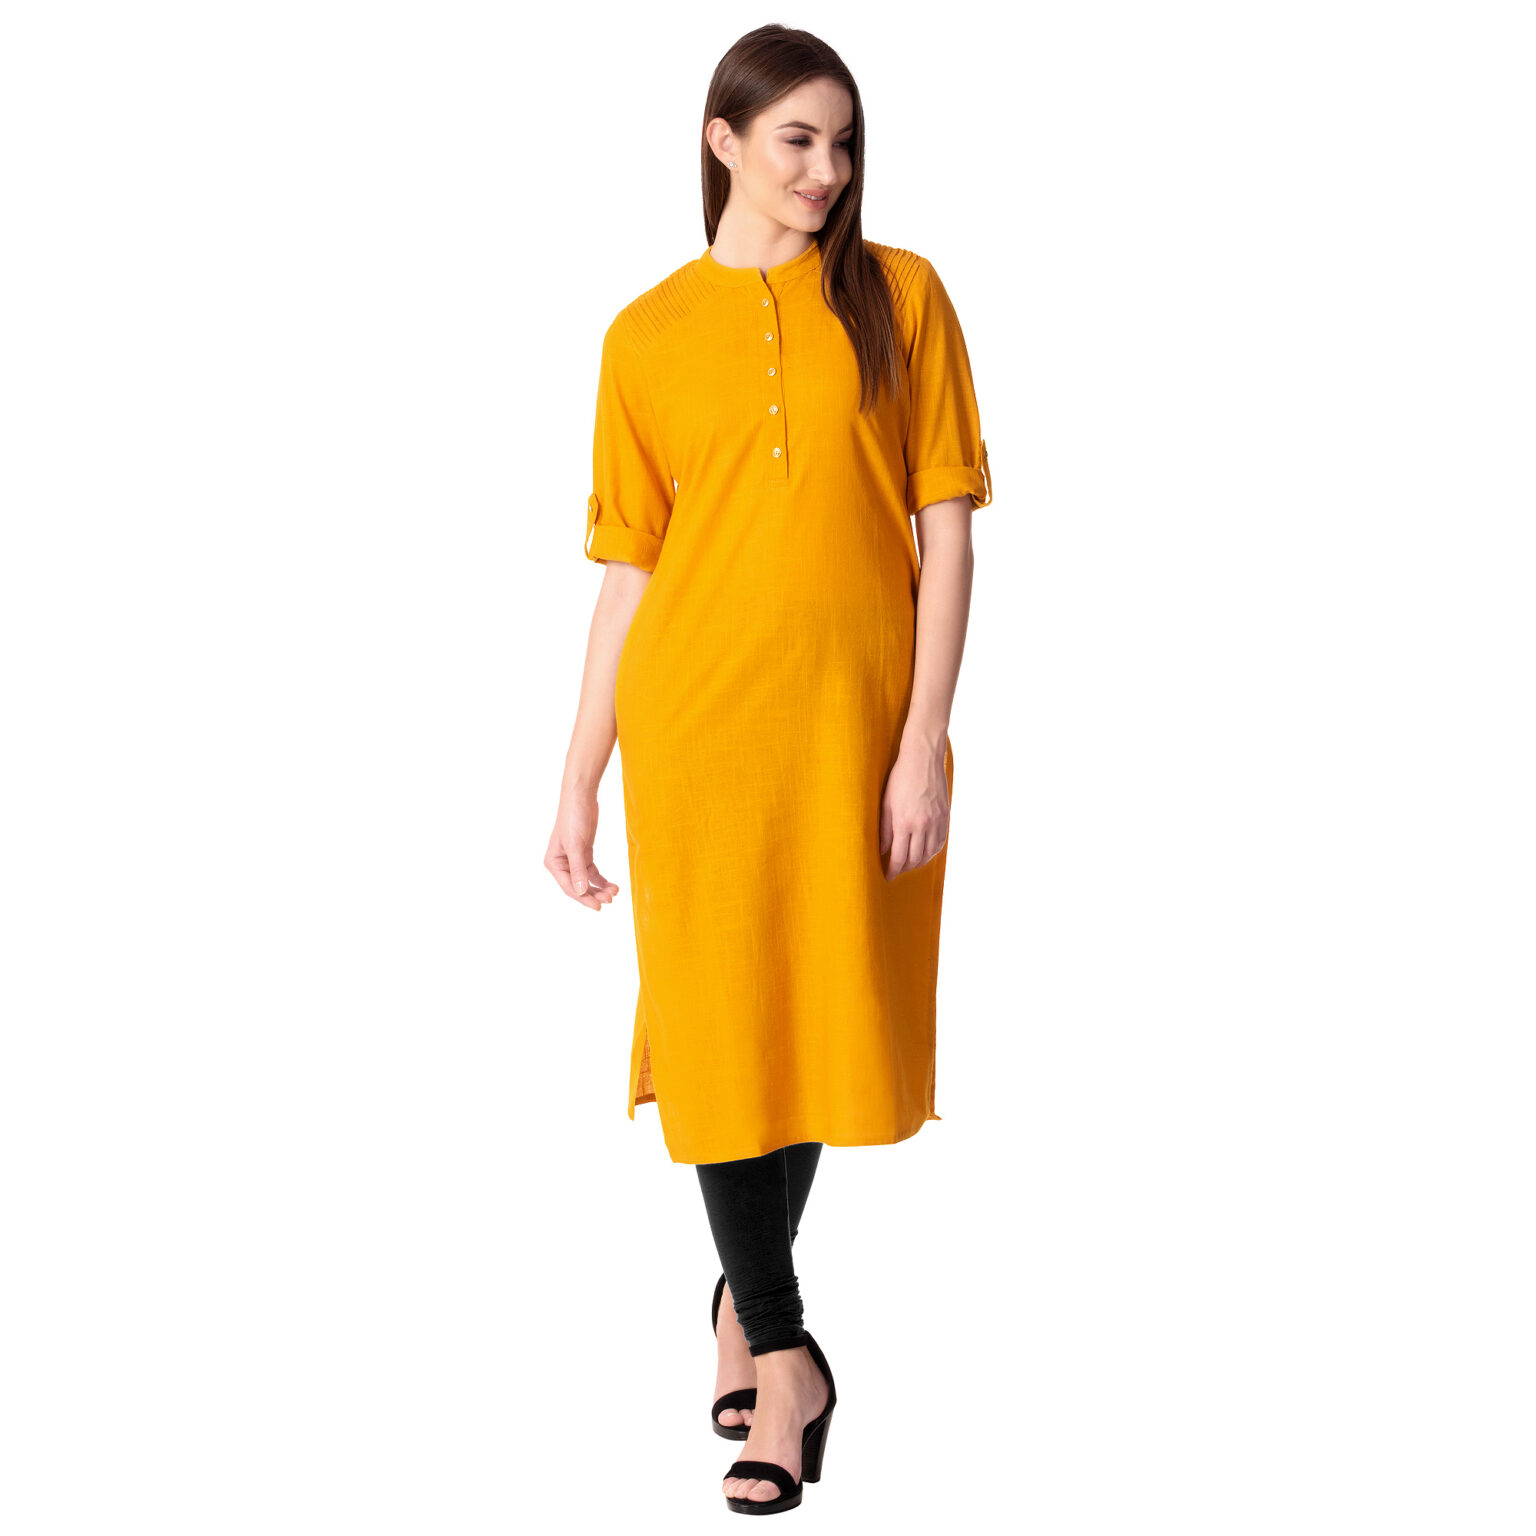 Ladies Khadi Kurta Price Starting From Rs 300/Unit | Find Verified Sellers  at Justdial